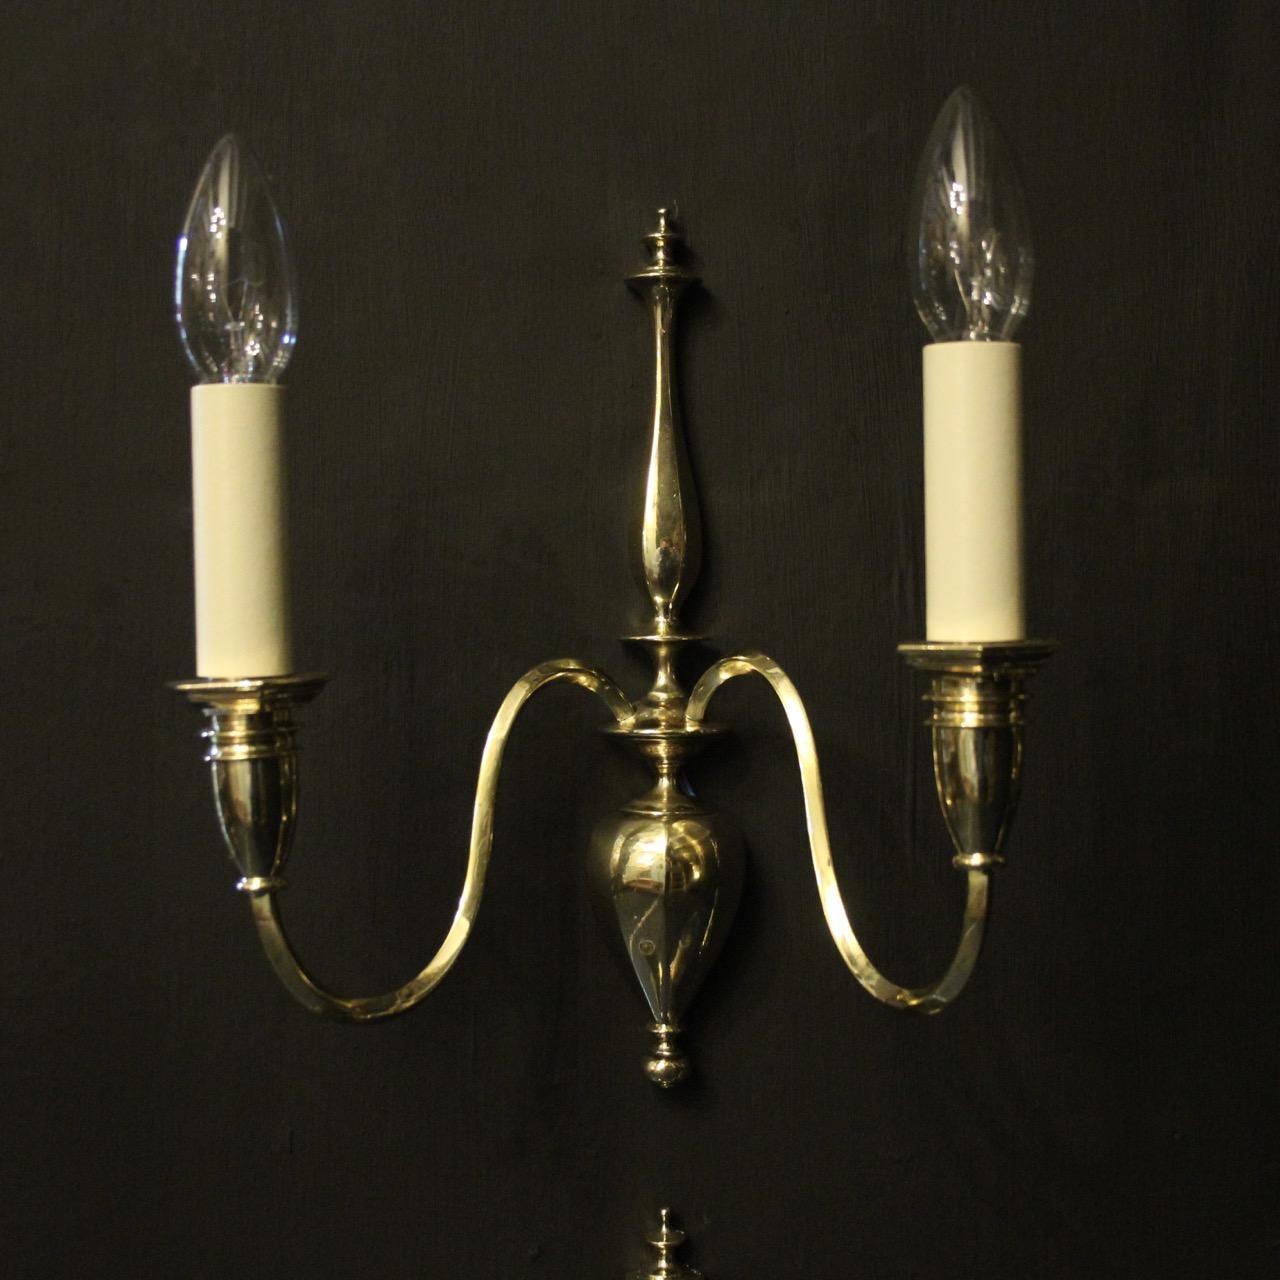 An English set of 4 re-polished cast brass twin arm antique wall lights, the decorative square gauge scrolling arms with hexagonal bulbous candle sconces, issuing from an elongated backplate with sectional bulbous base, sympathetically re-polished